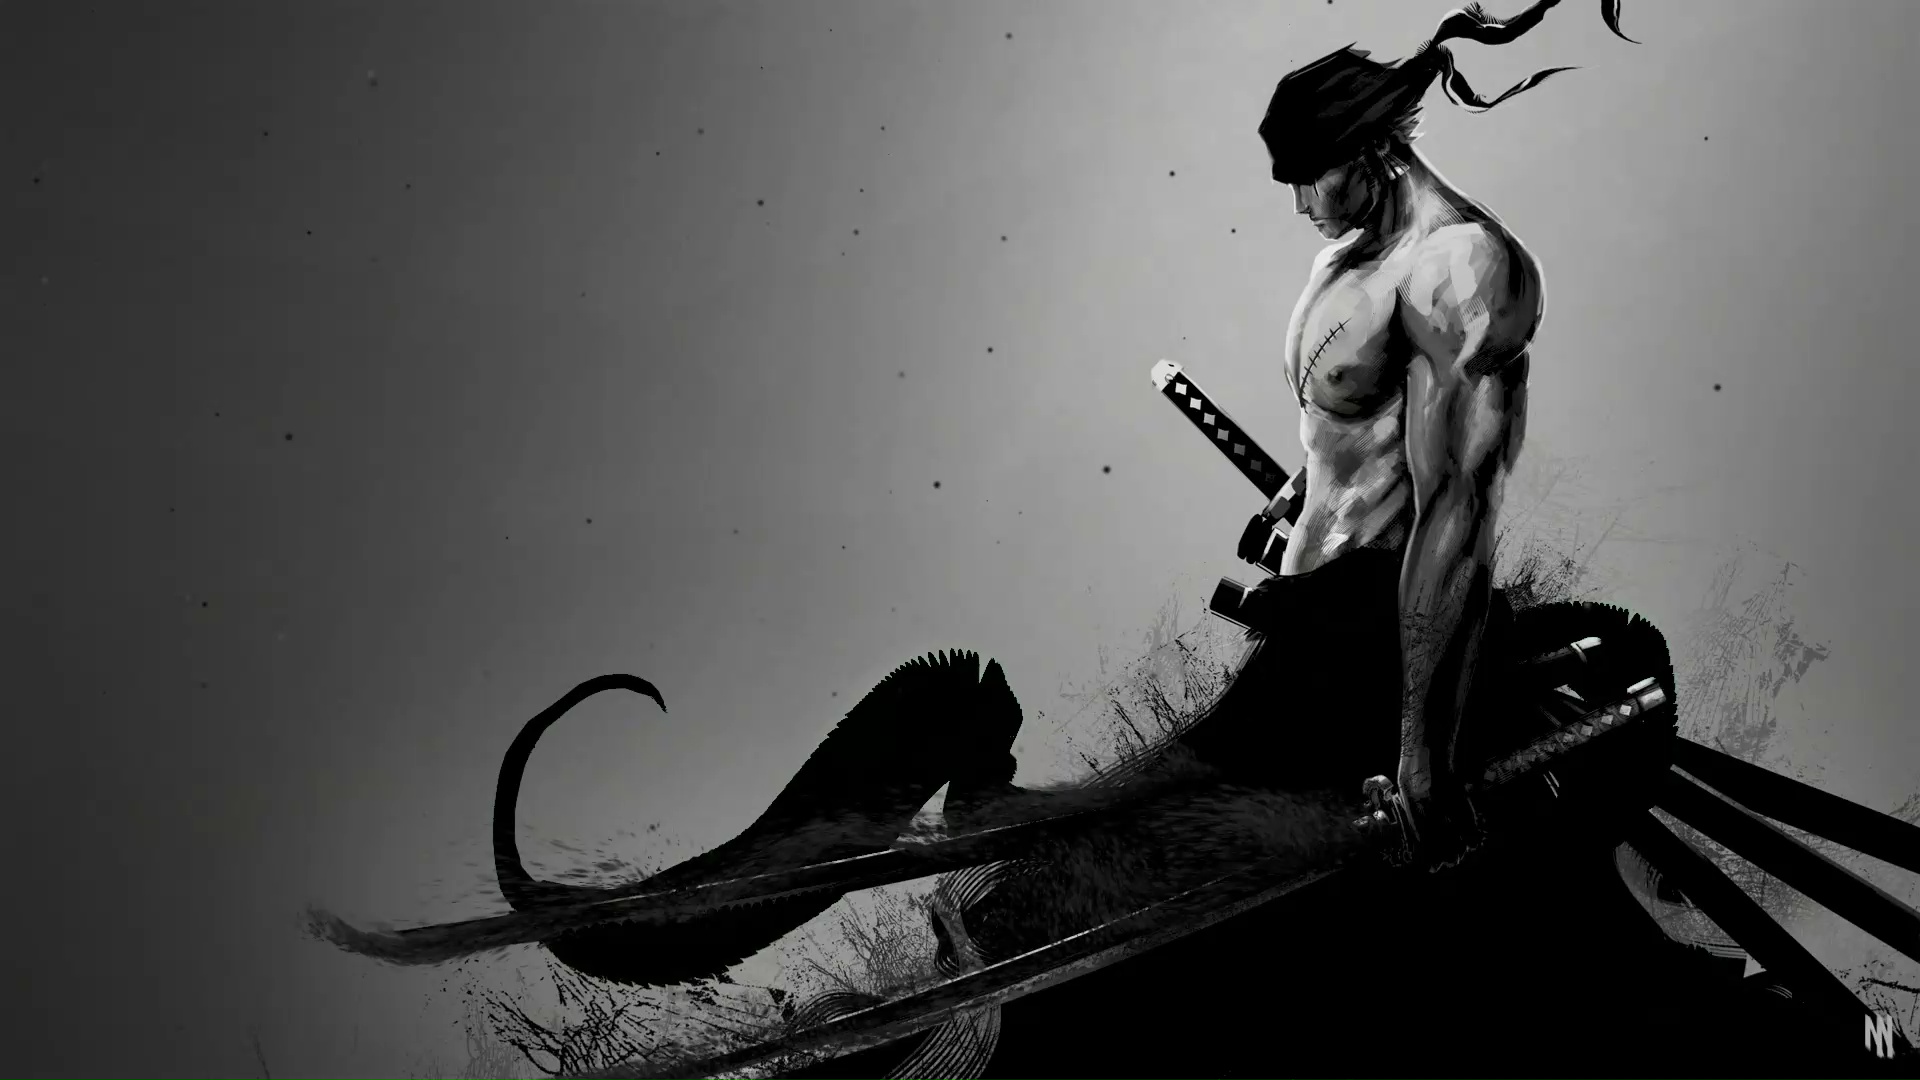 One Piece Black And White  One piece photos One piece wallpaper iphone  Black and white one piece